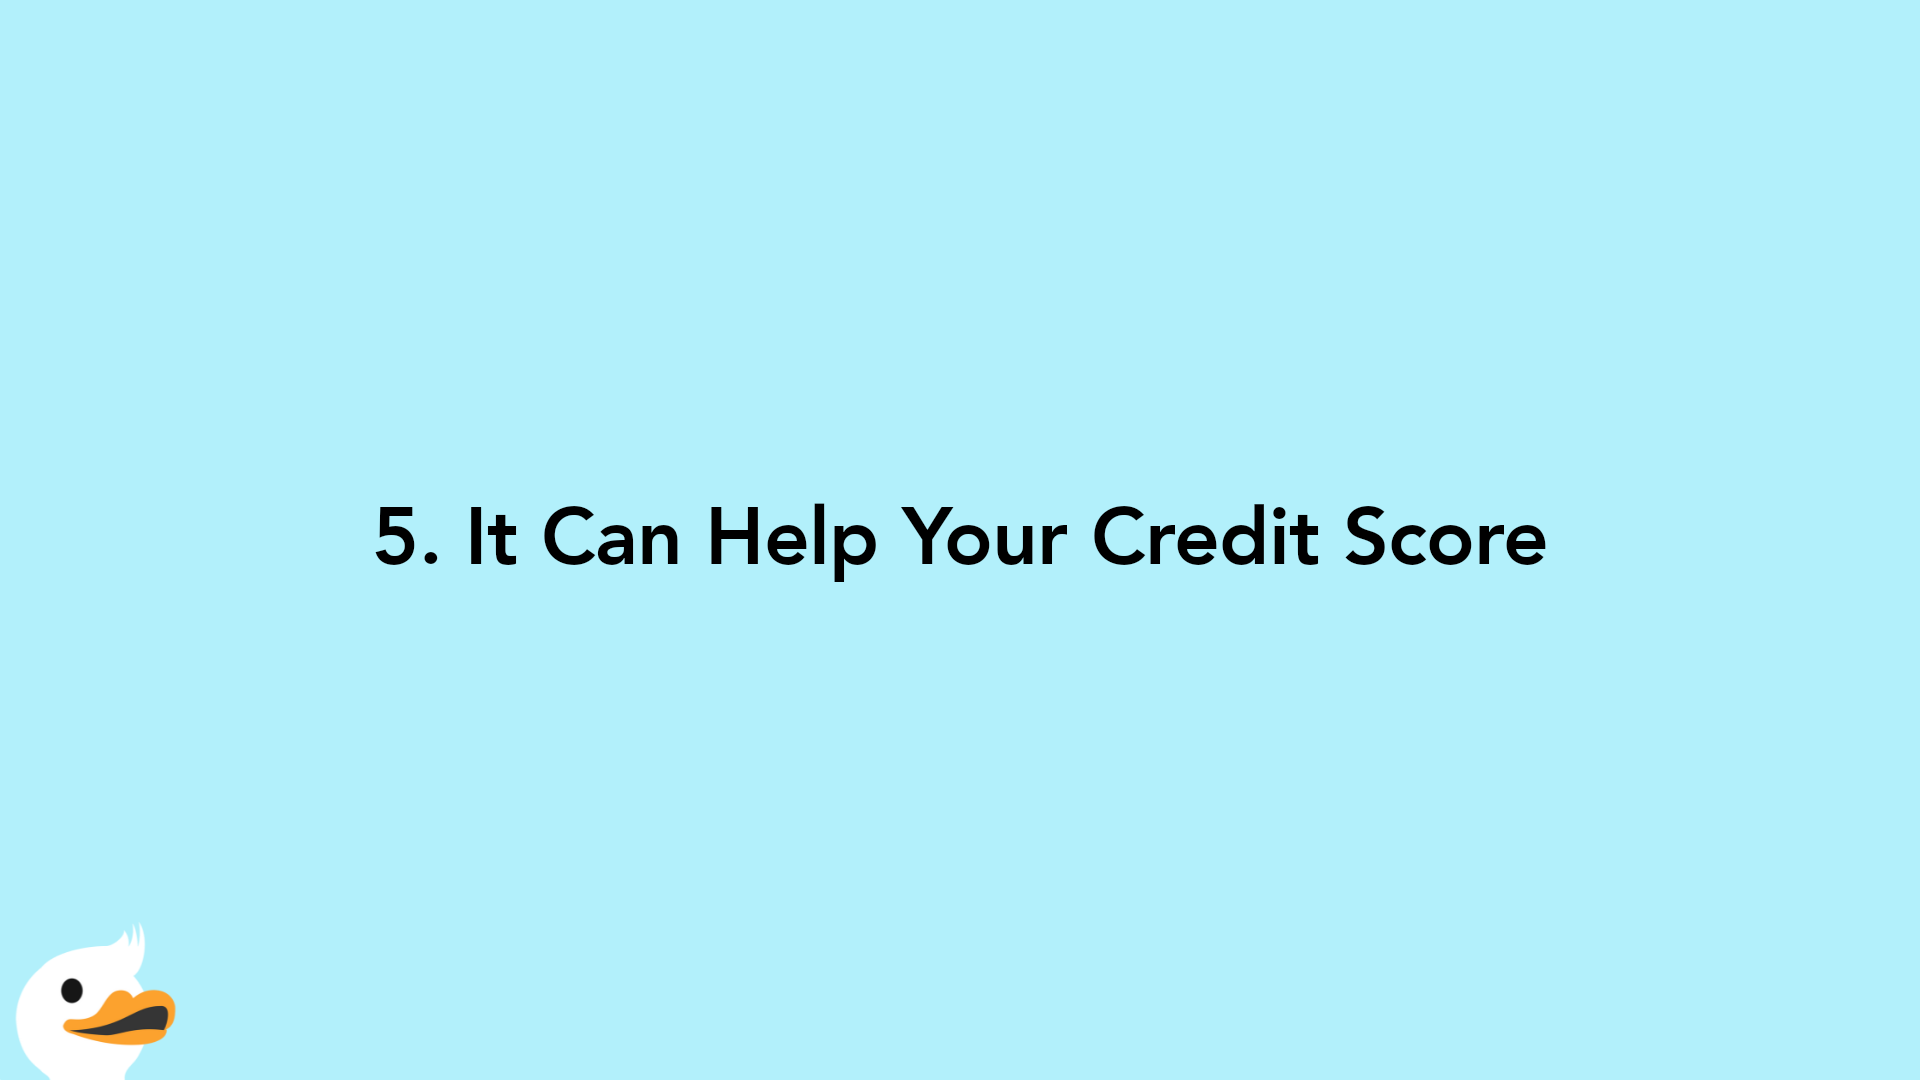 5. It Can Help Your Credit Score